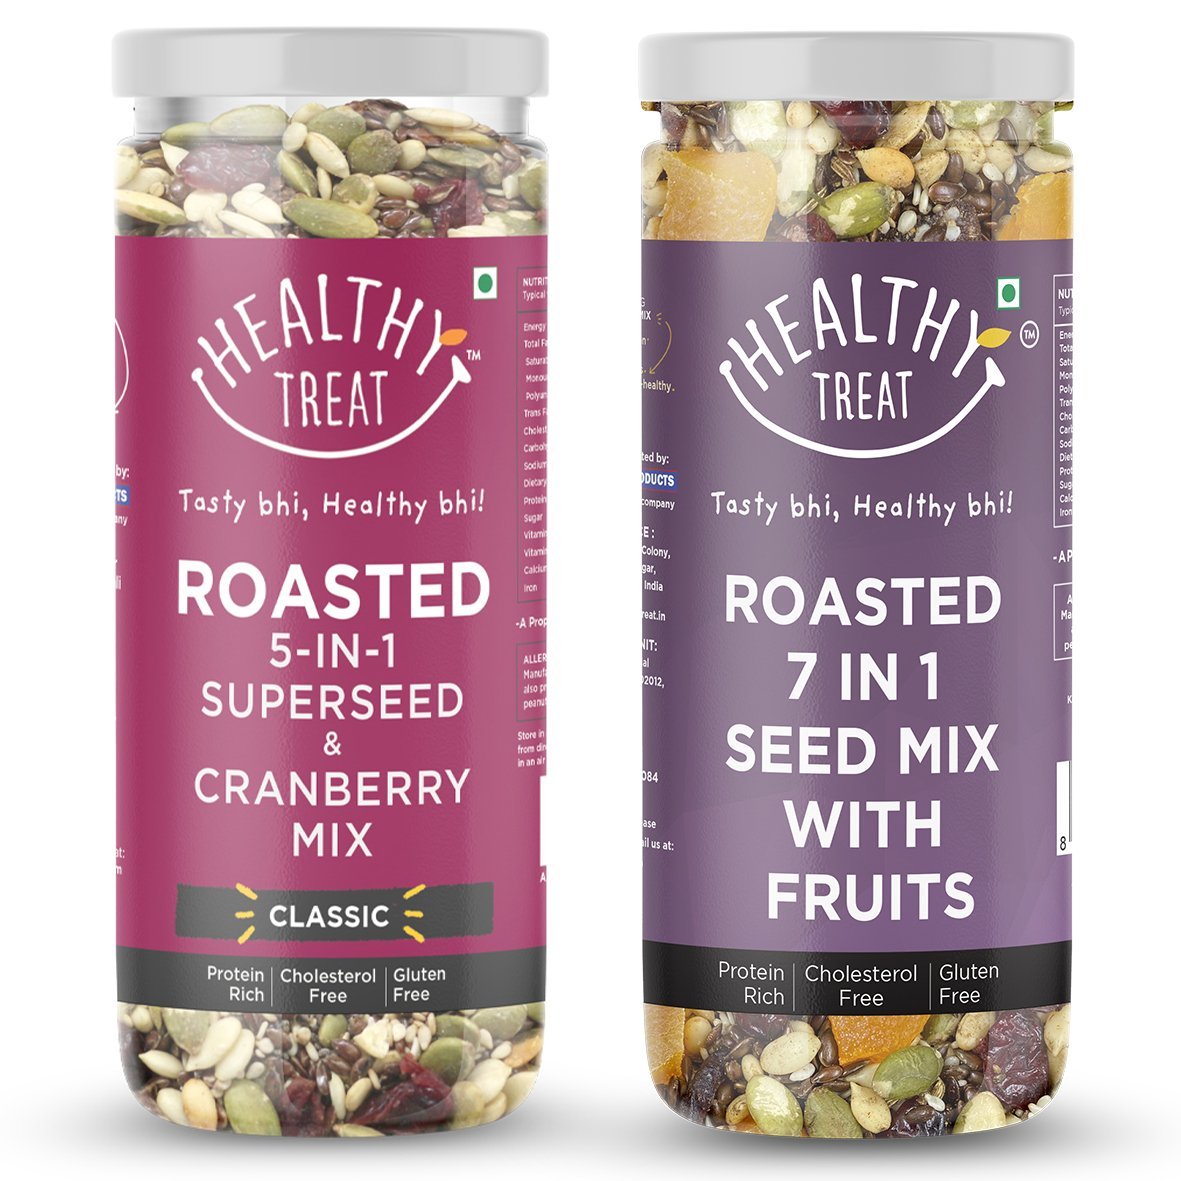 5 in 1 Seed Mix with Cranberries, 7 in 1 Seed Mix with Fruits Combo.